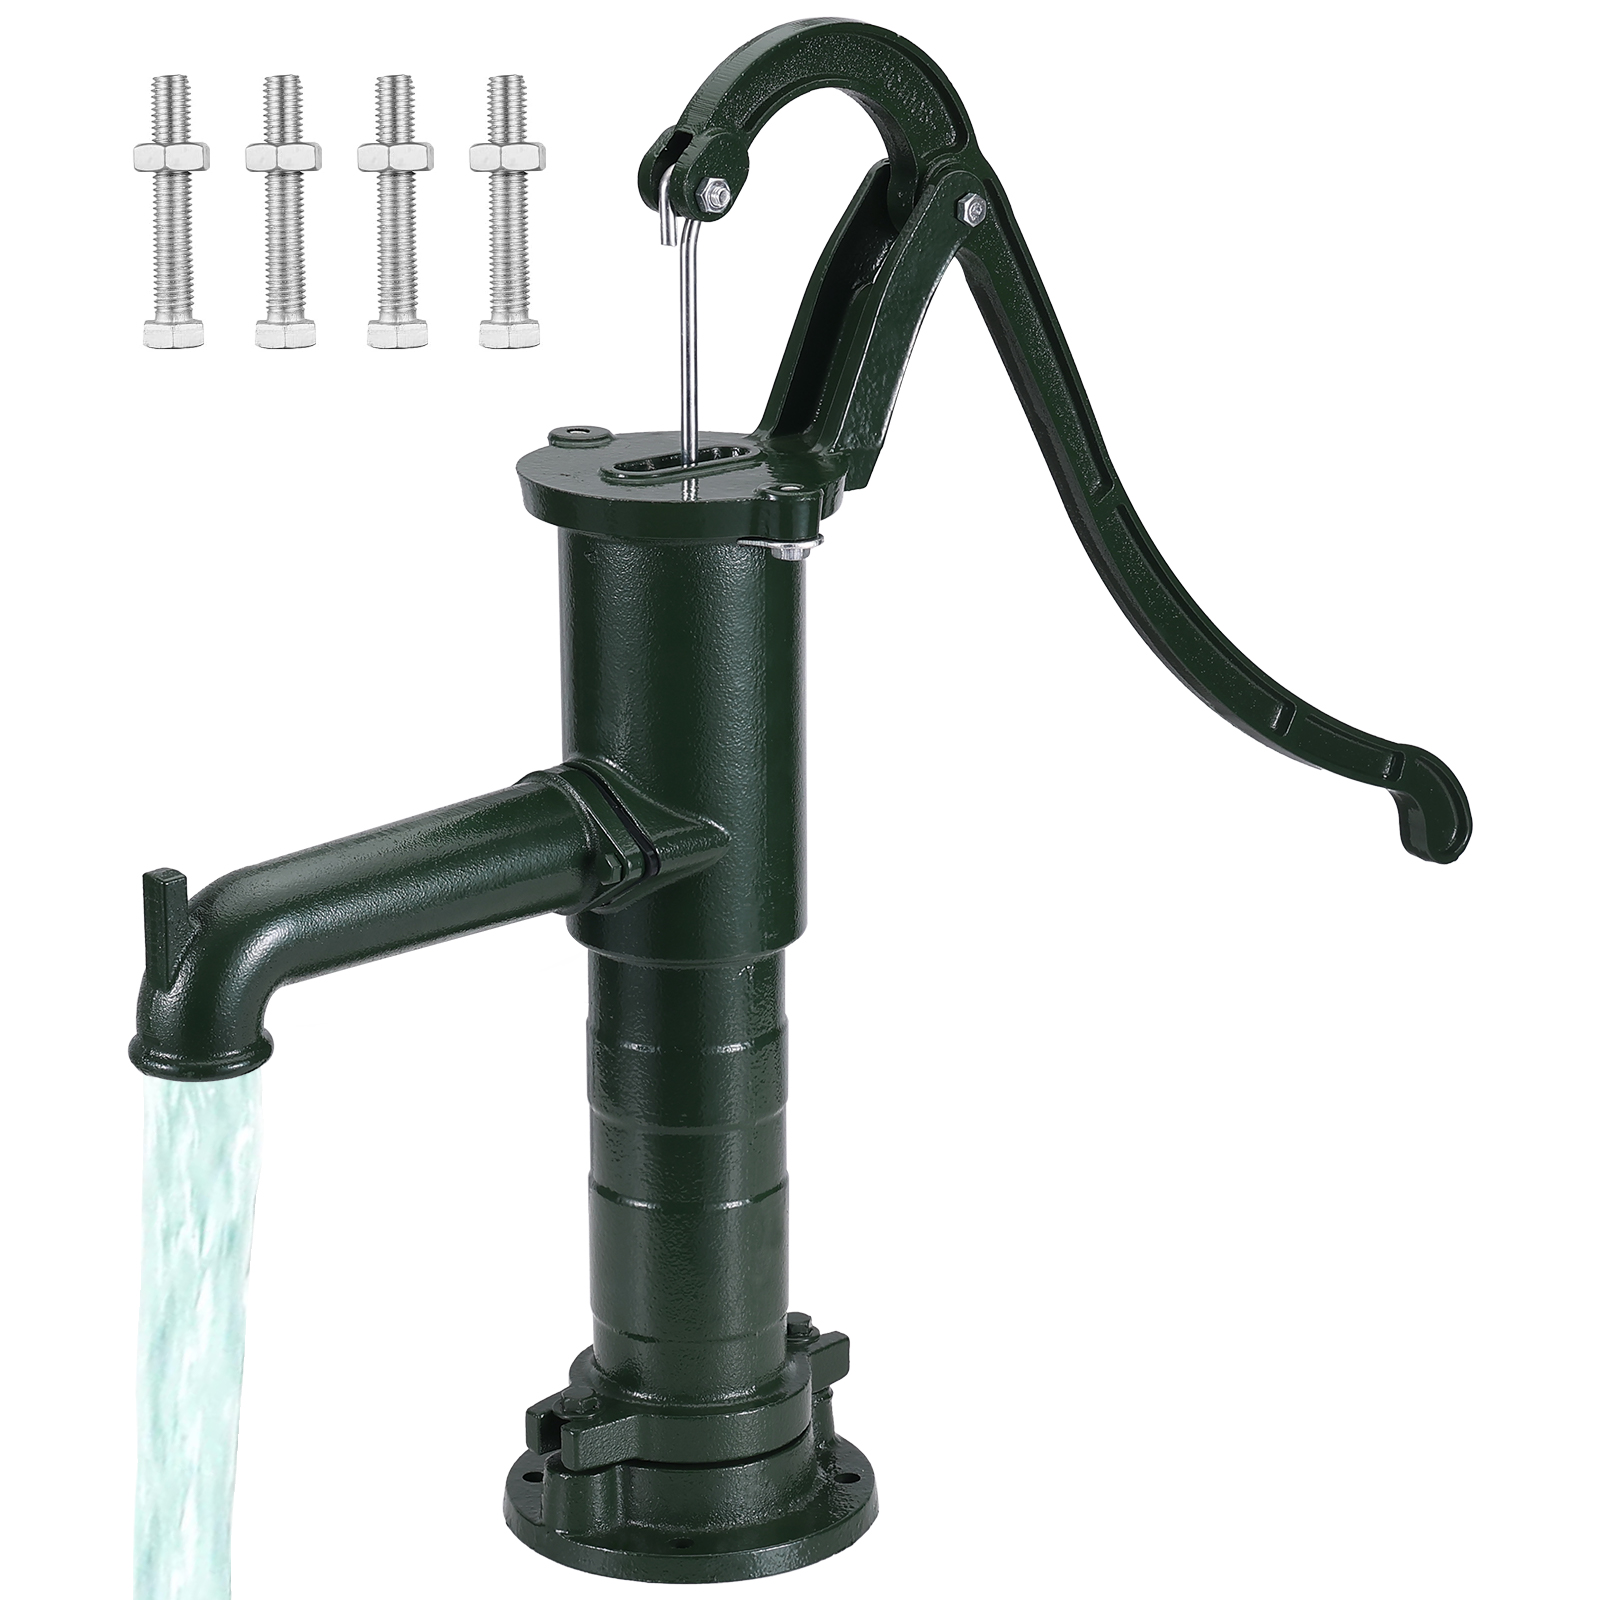 VEVOR Antique Well Hand Pitcher Pump, 22 ft Maximum Lift, Cast Iron Manual  Hand Water Pump with Ergonomic Handle G1-5/8 Easy Installation, Old  Fashioned for Outdoor Home Yard Garden Pond Farm, Green